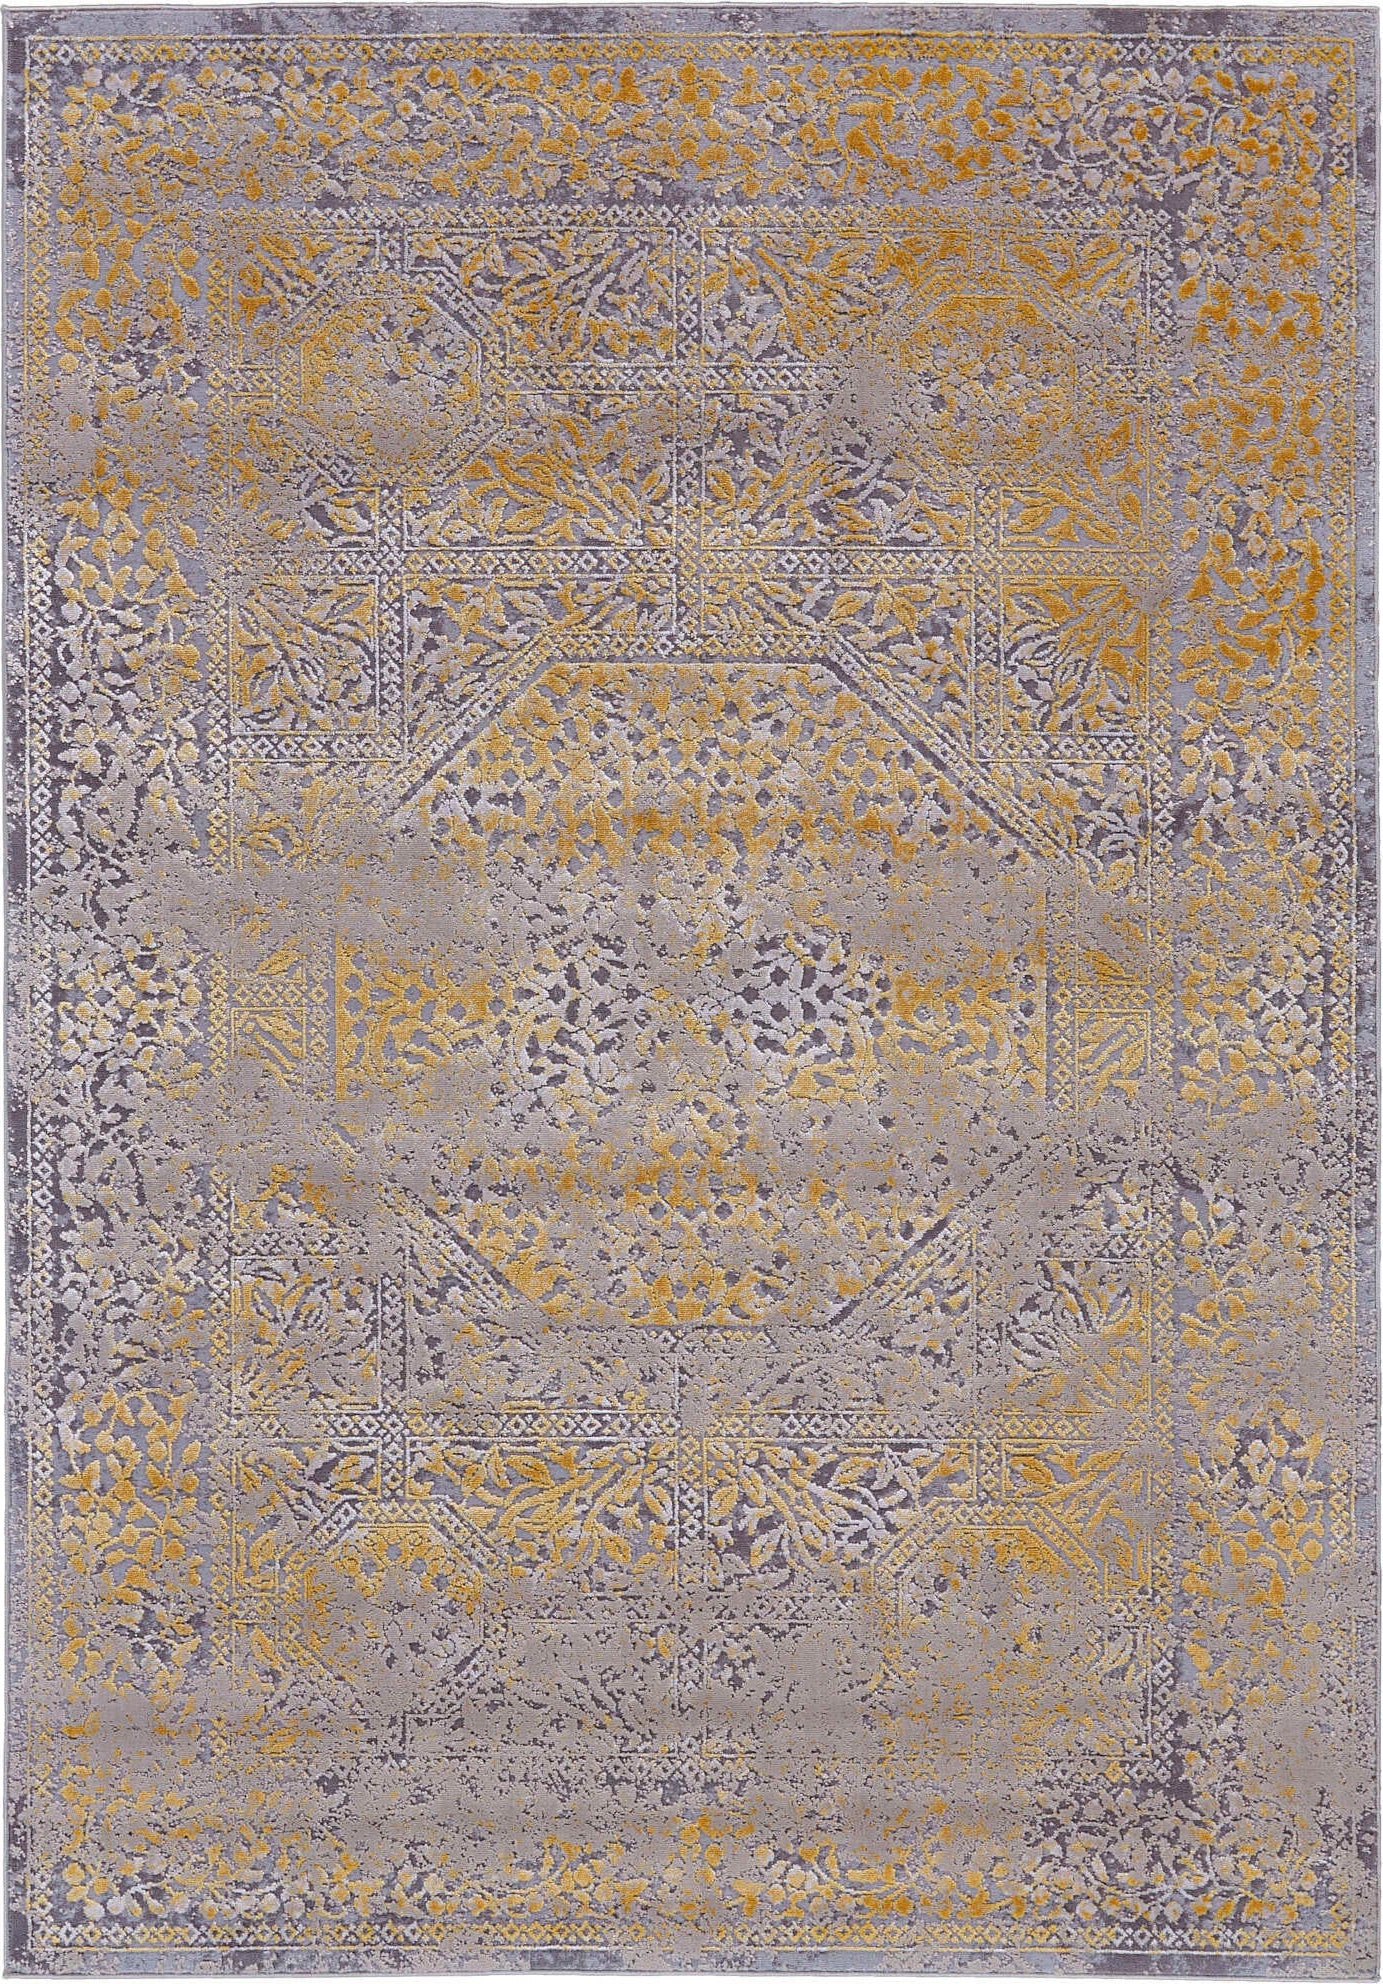 Feizy Waldor 3971F Gold/Sand Area Rug